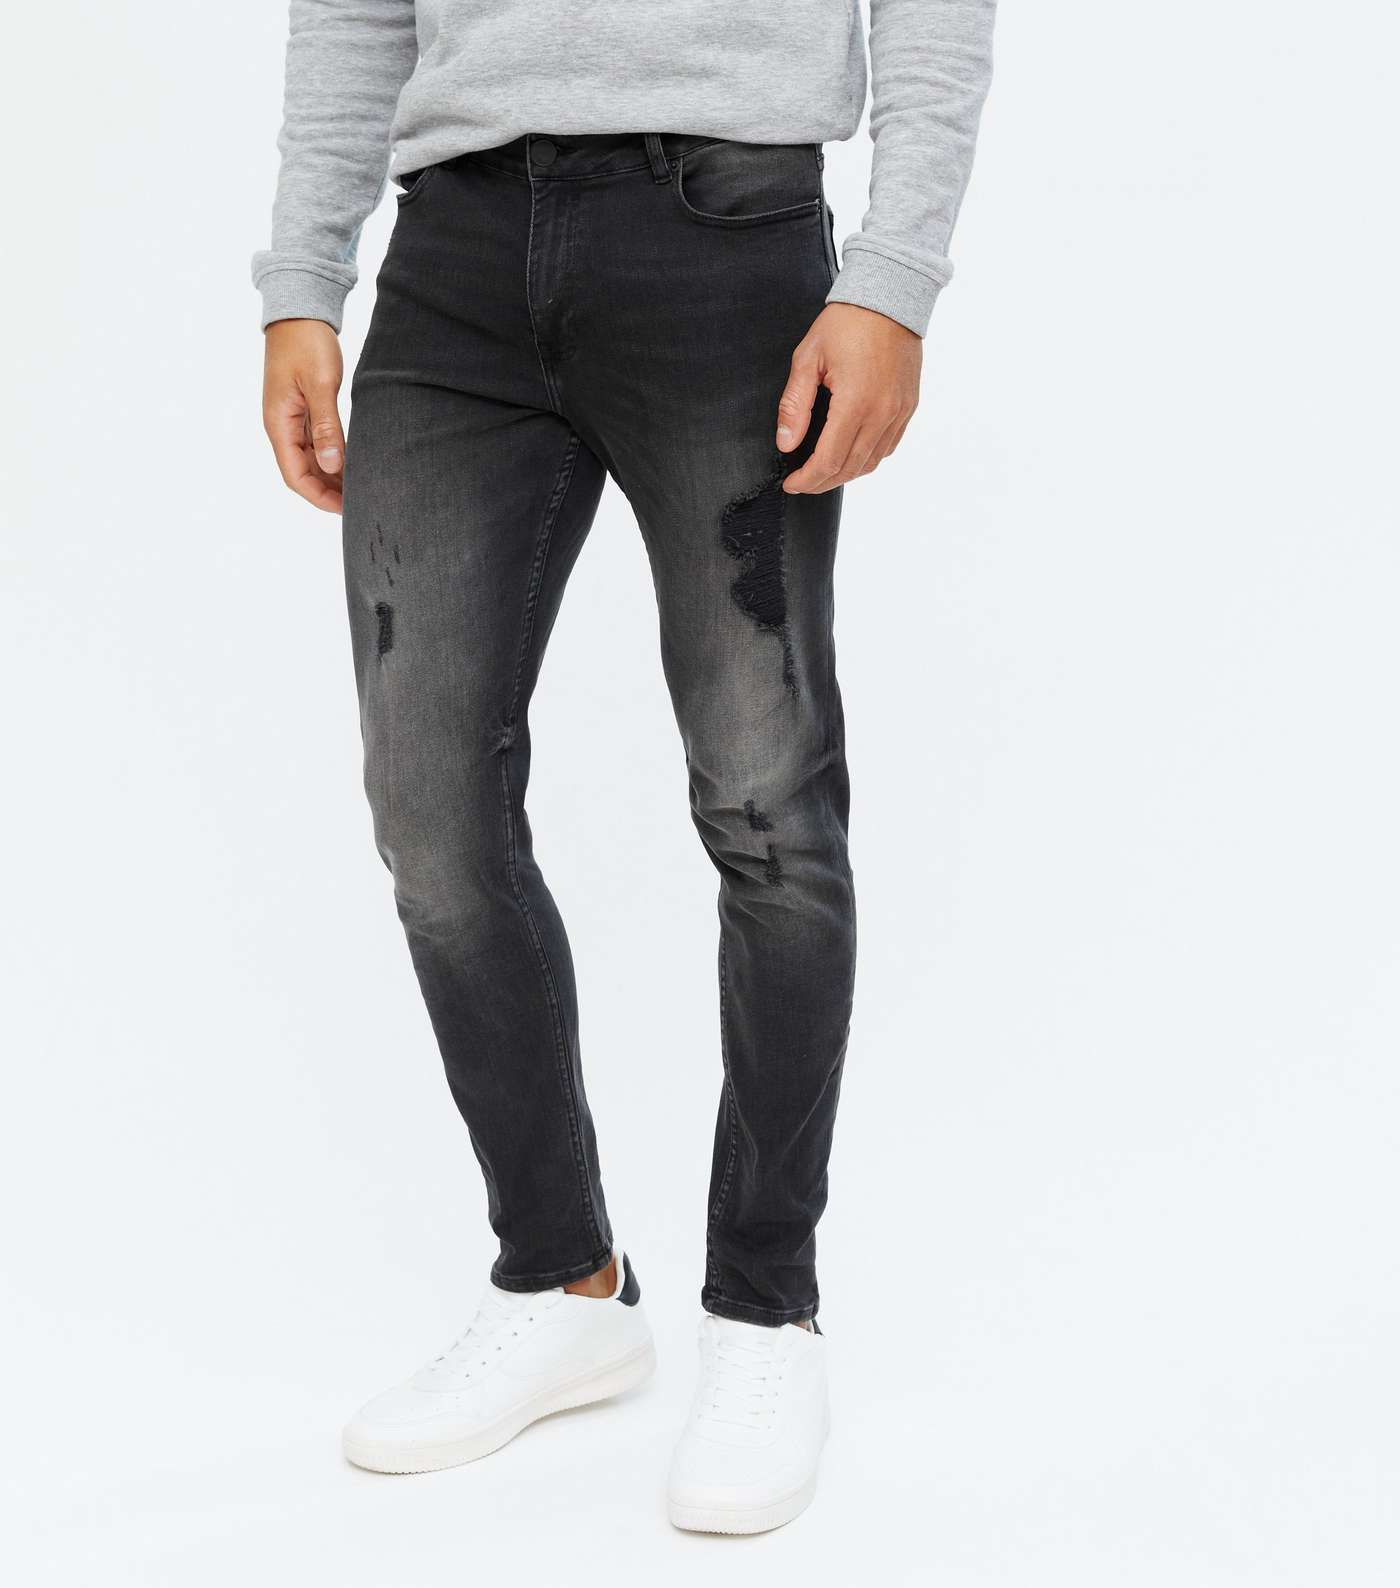 Black Washed Ripped Skinny Fit Jeans Image 2